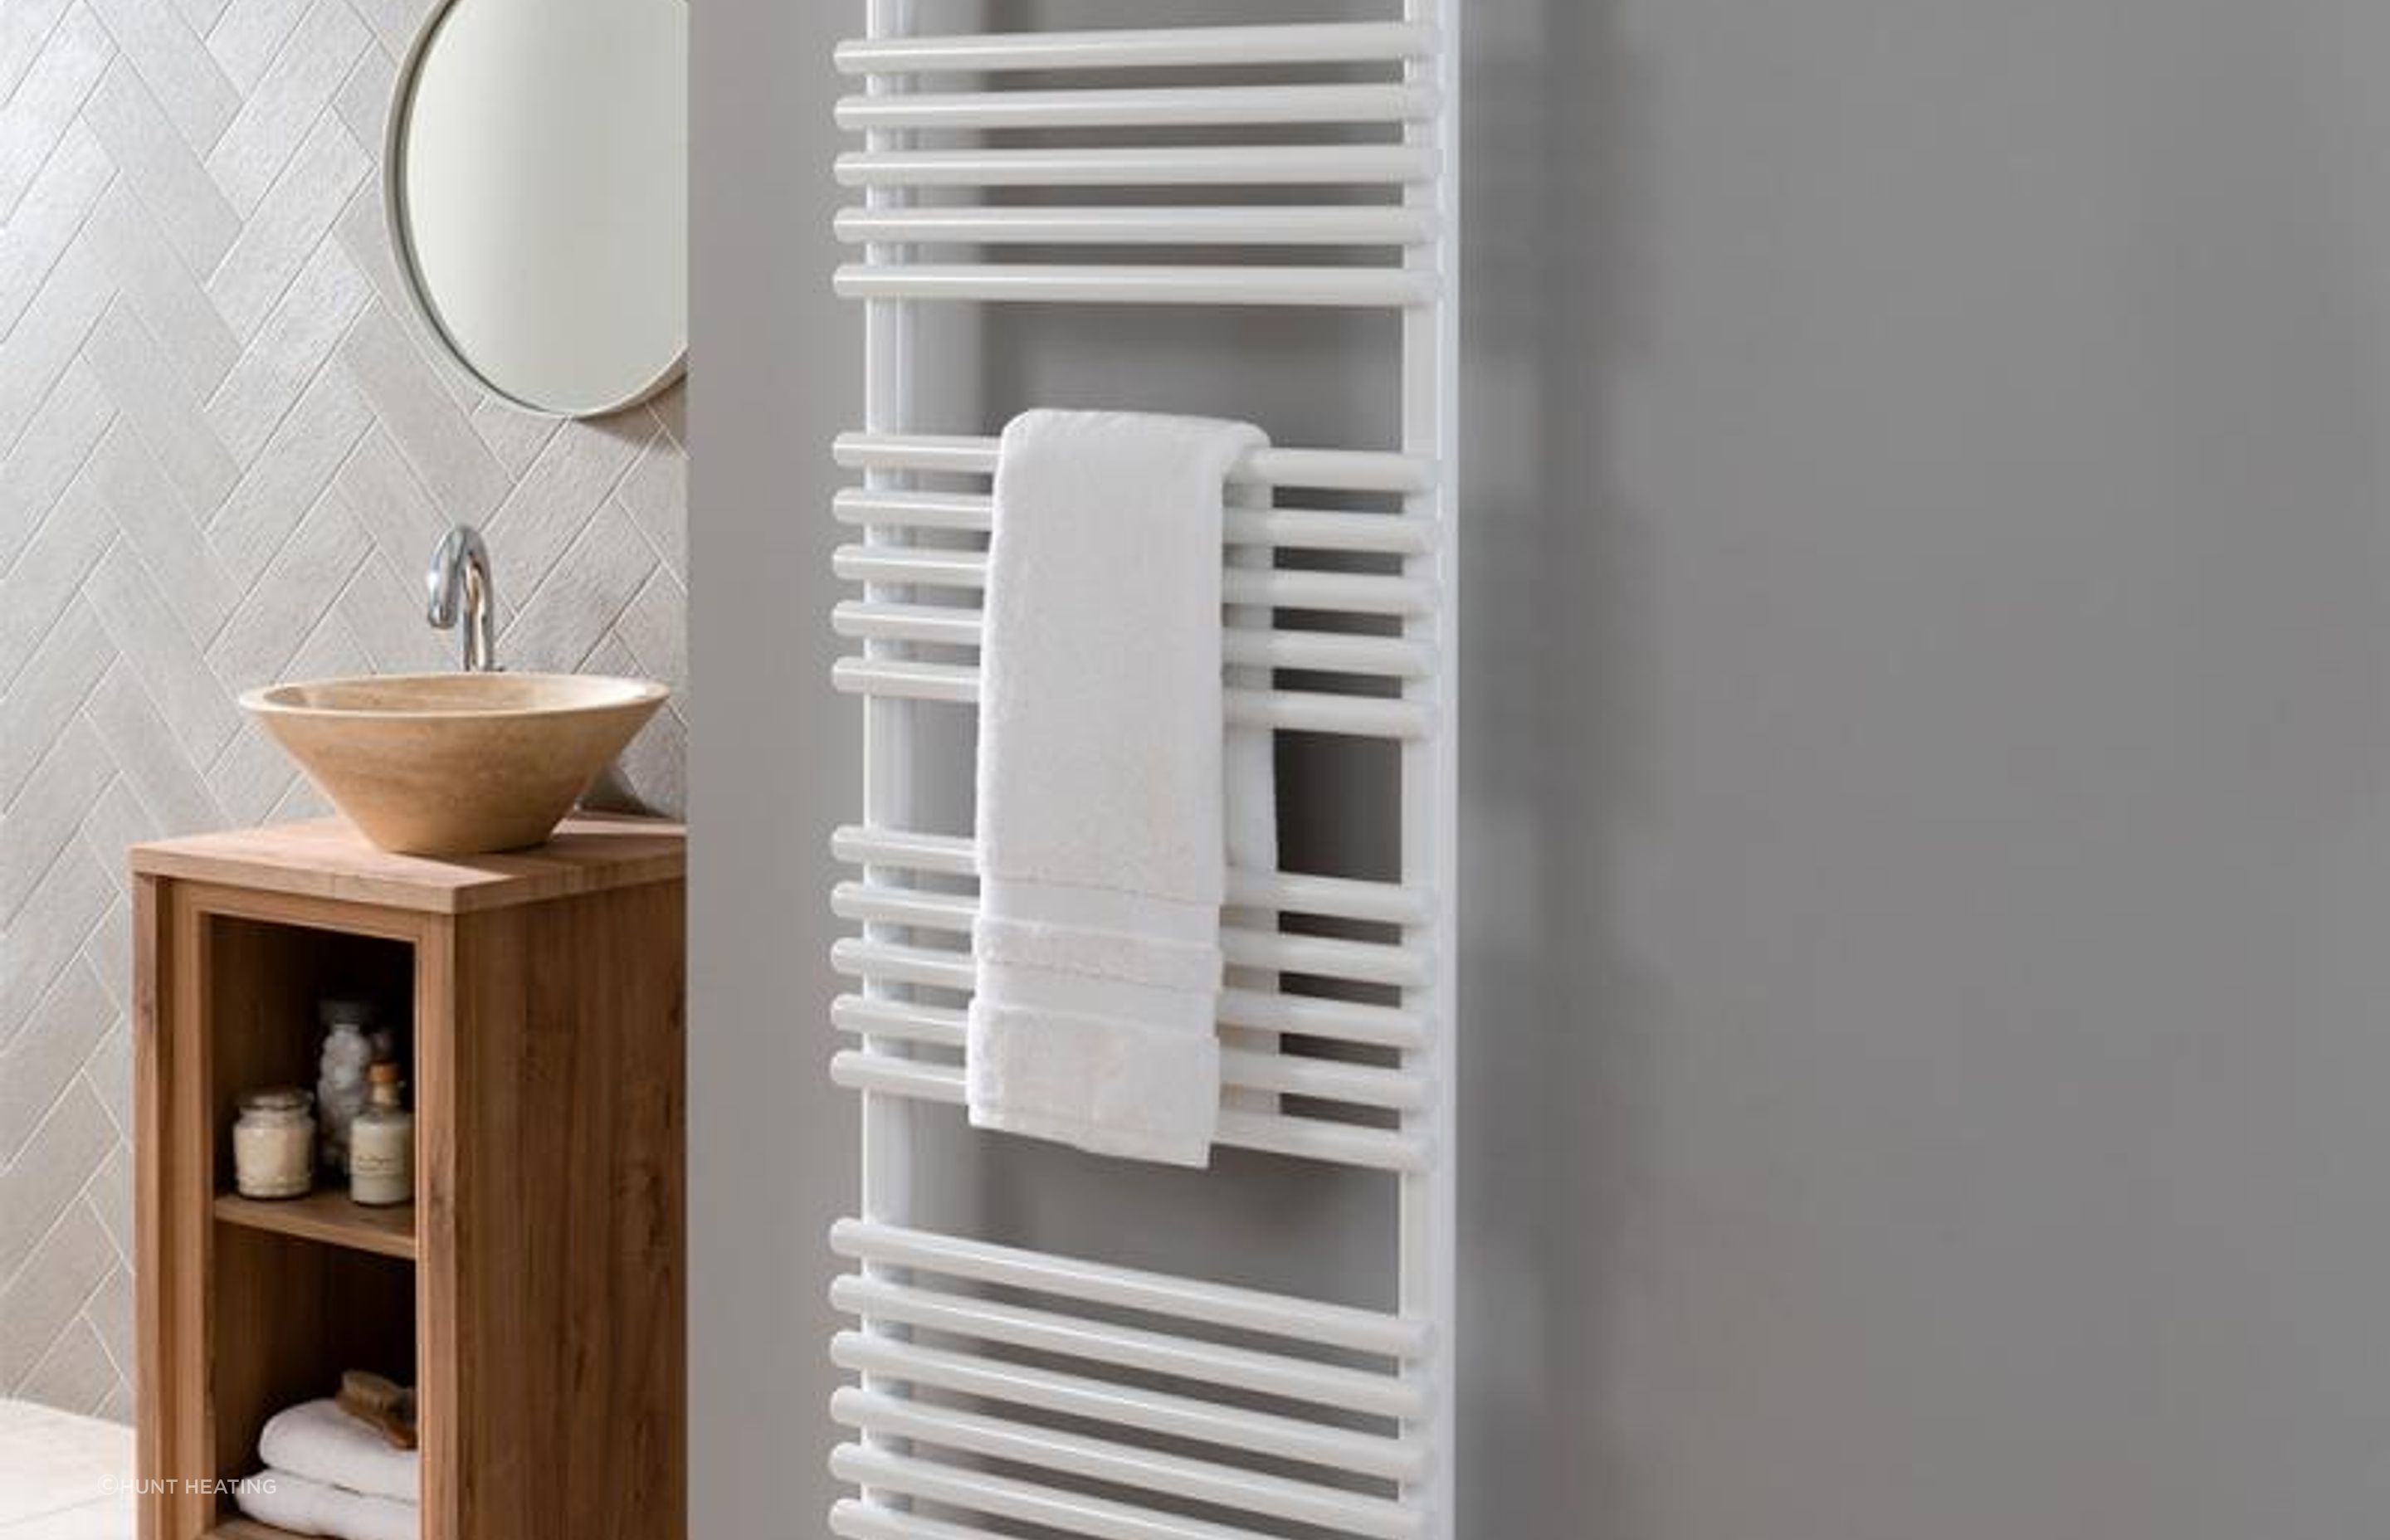 BD 25 Heated Towel Rails from Hunt Heating